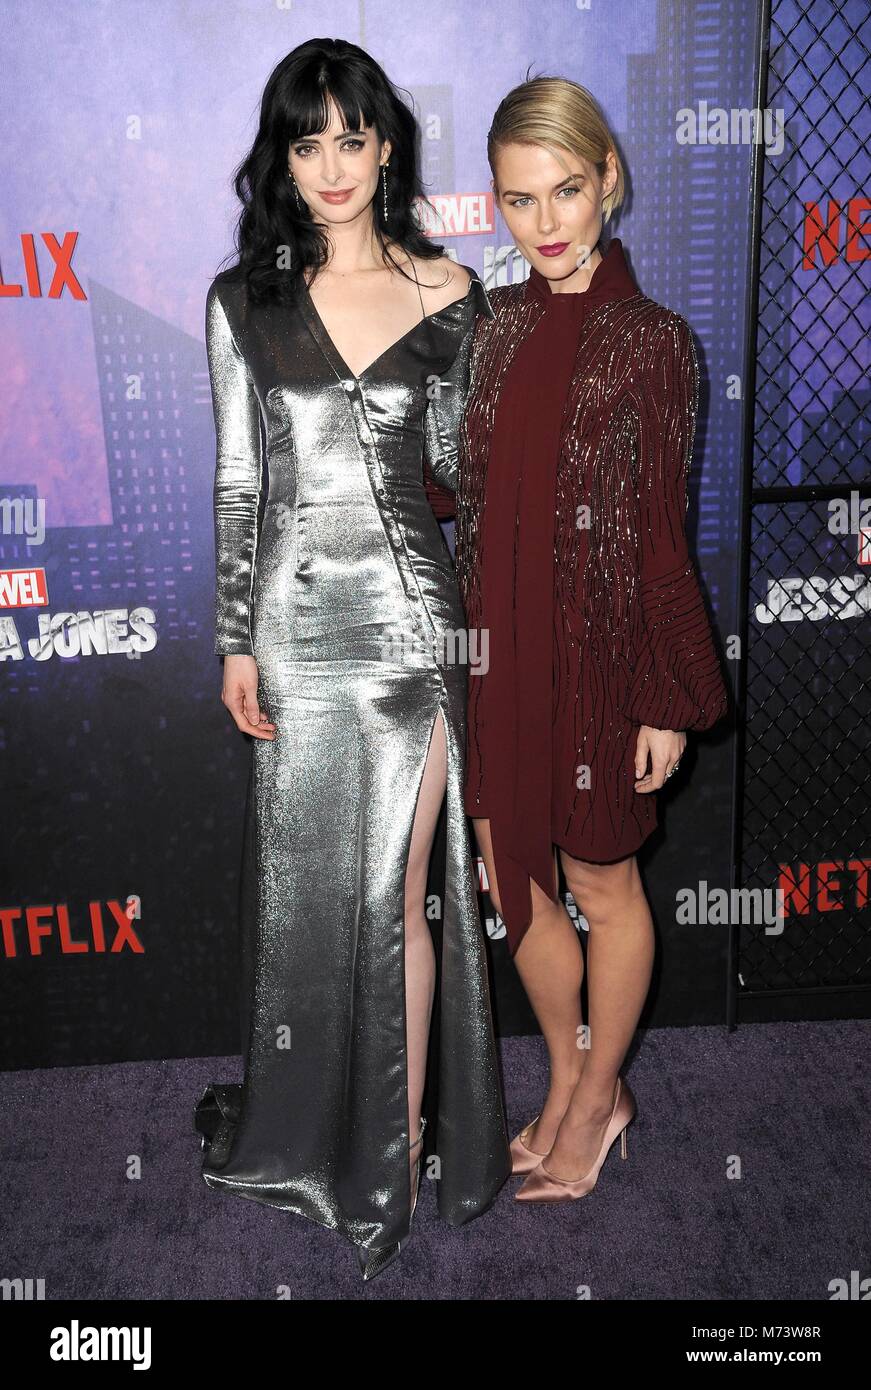 Krysten Ritter, Rachael Taylor at arrivals for MARVEL’S JESSICA JONES Season 2 Premiere, AMC Loews Lincoln Square, New York, NY March 7, 2018. Photo By: Kristin Callahan/Everett Collection Stock Photo